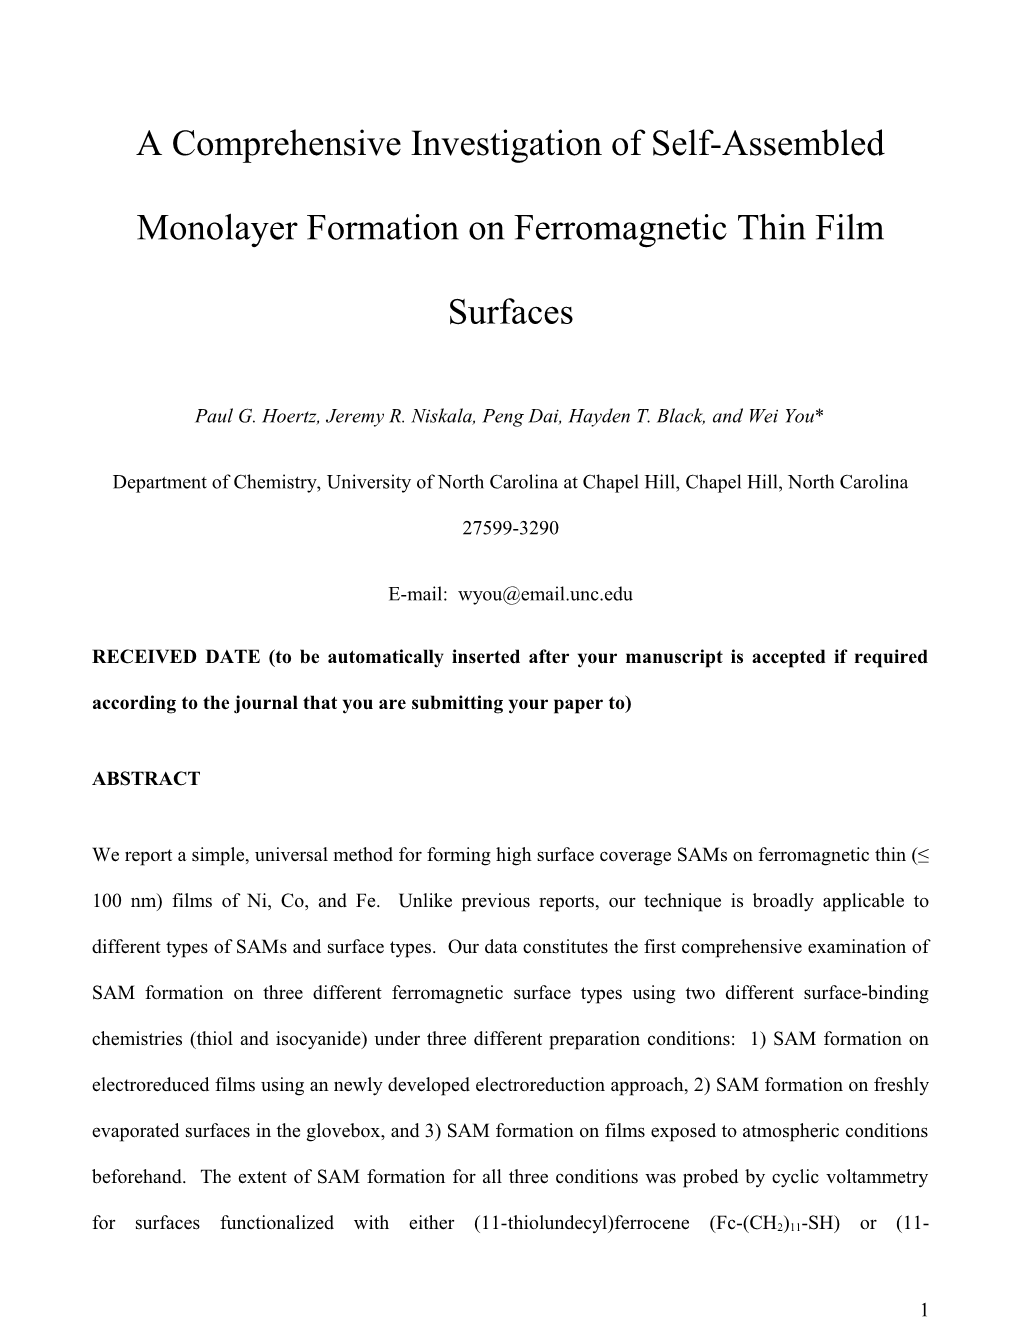 A Comprehensive Investigation of Self-Assembled Monolayer Formation on Ferromagnetic Thin